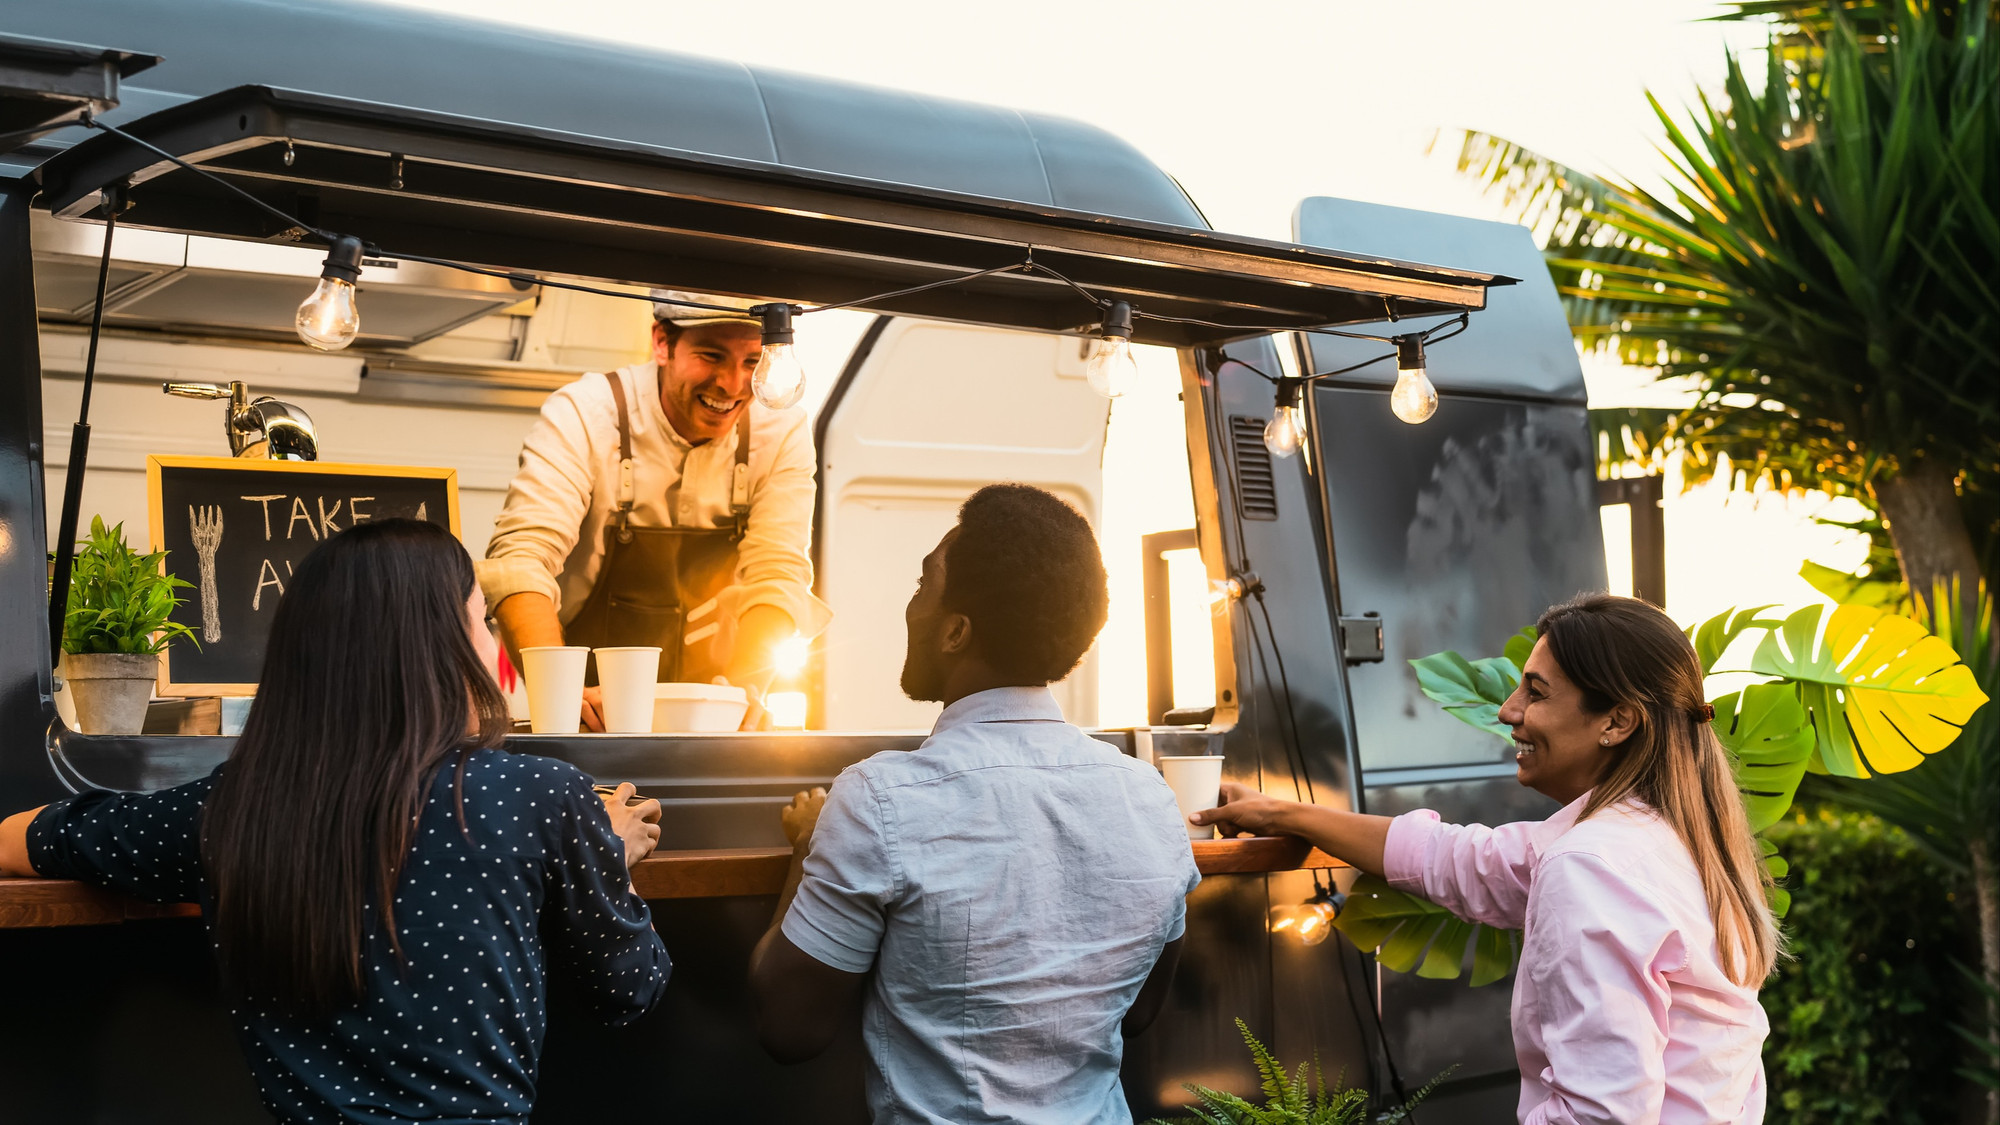 Montreal’s First Fridays food truck event is coming back this summer!